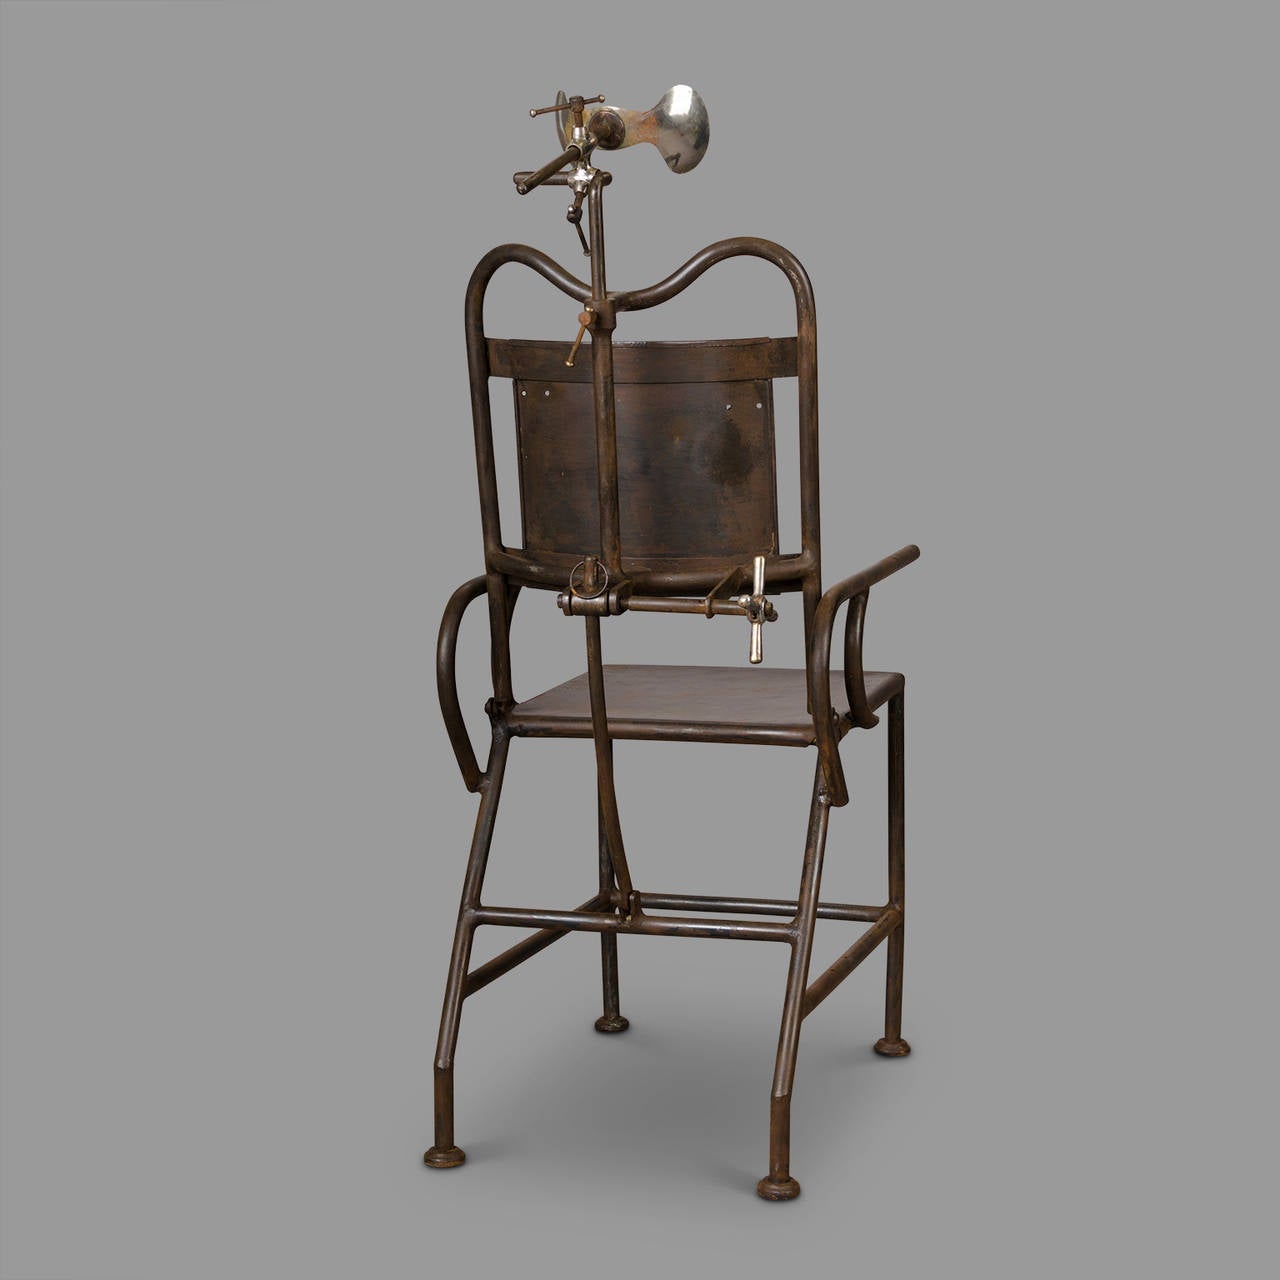 Medical Armchair in Sheet Metal and Nickel Parts, circa 1930 For Sale 1